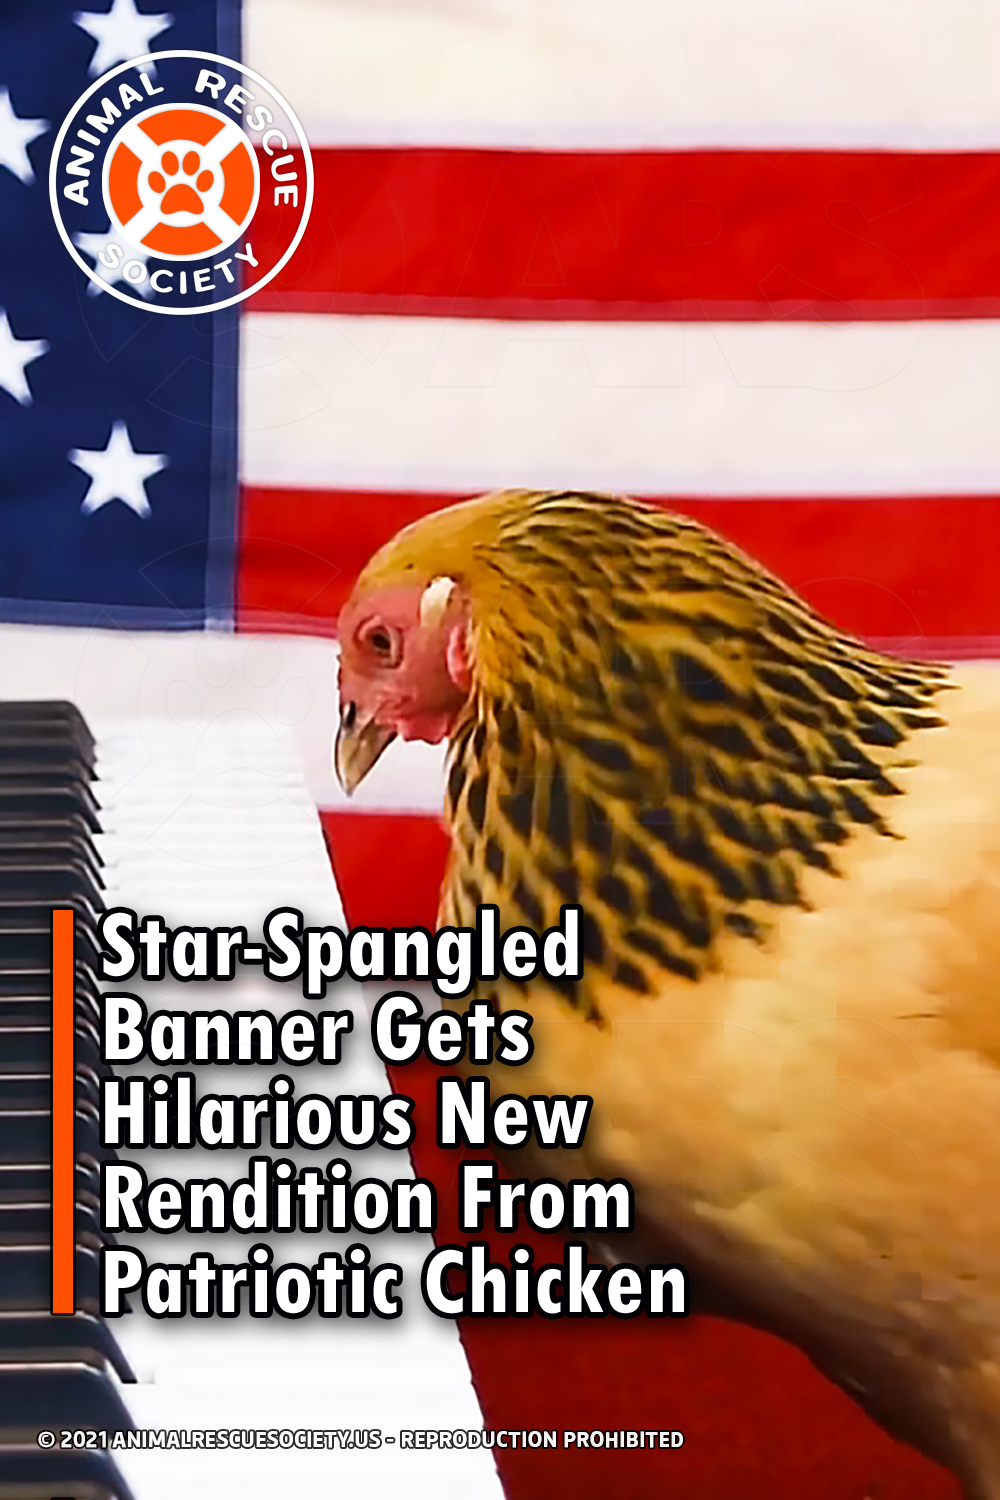 Star-Spangled Banner Gets Hilarious New Rendition From Patriotic Chicken